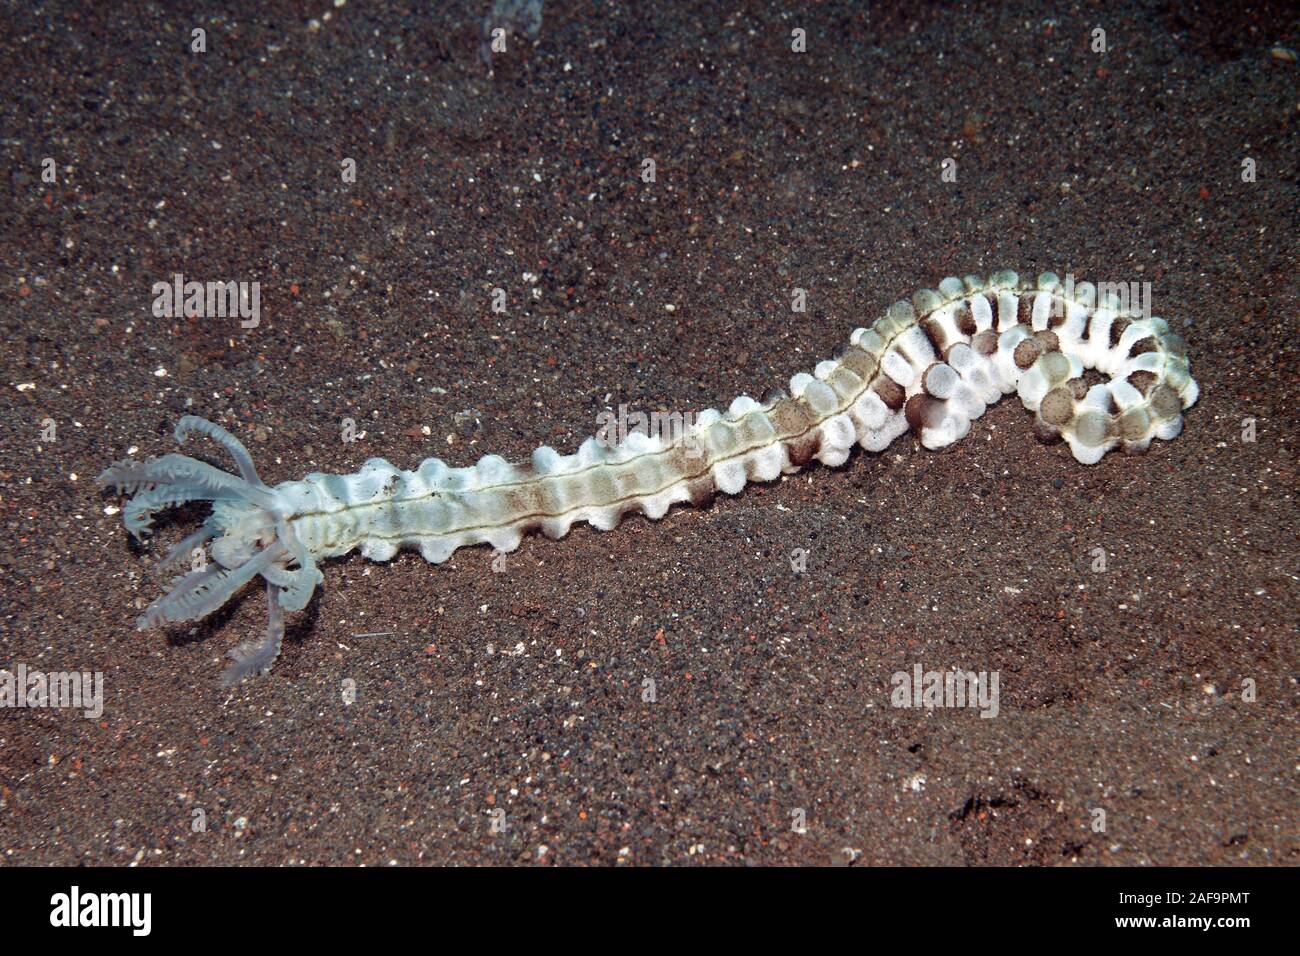 Snake Sea Cucumber, Synapta maculata. Also known as Spotted Worm Sea Cucumber, Feather Mouth Sea Cucumber and Giant Synaptid Sea Cucumber. Stock Photo